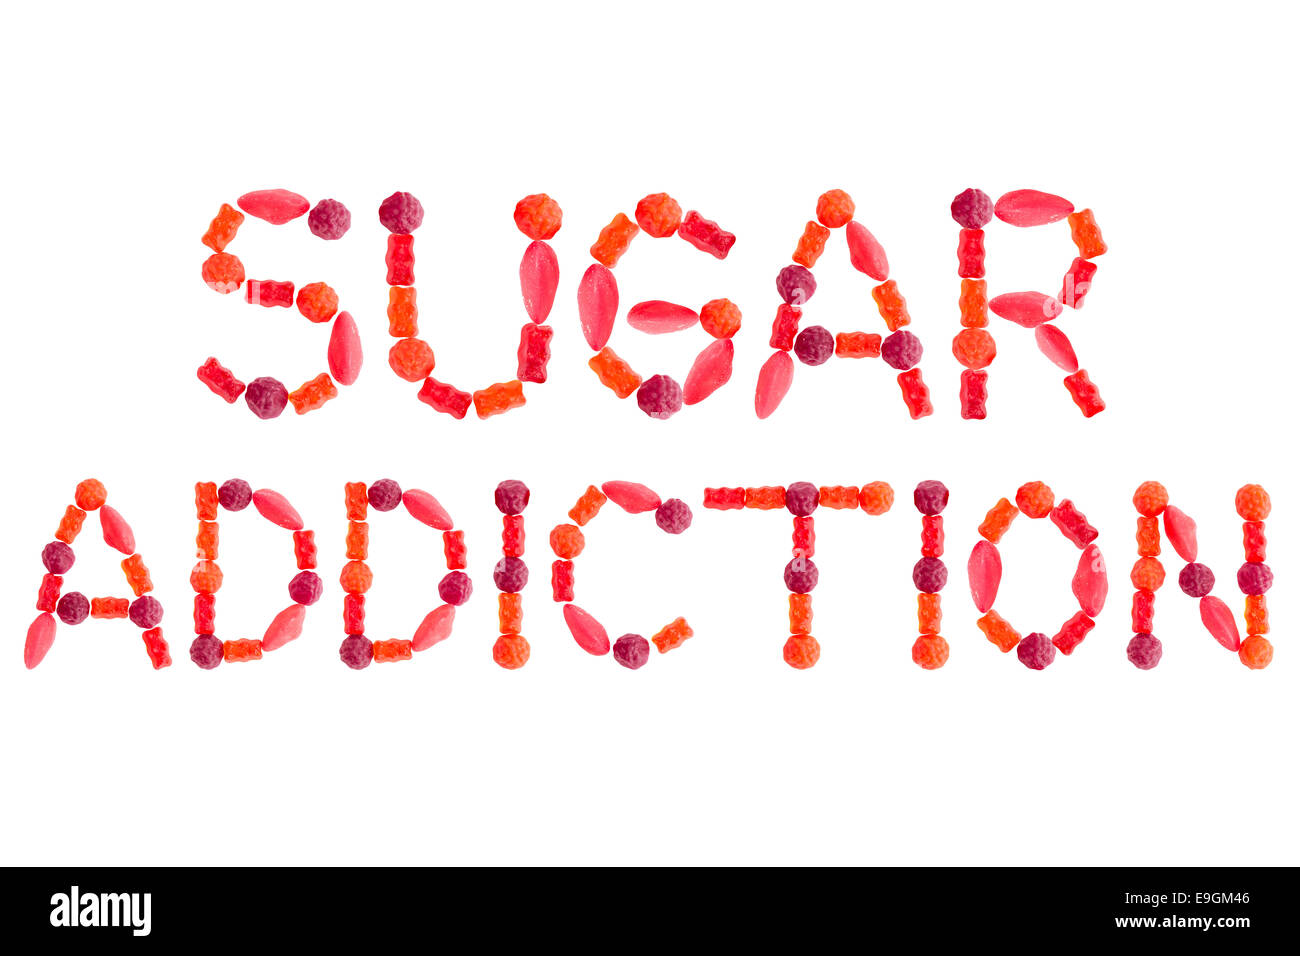 Words SUGAR ADDICTION made of red sugary candies, isolated on white background Stock Photo